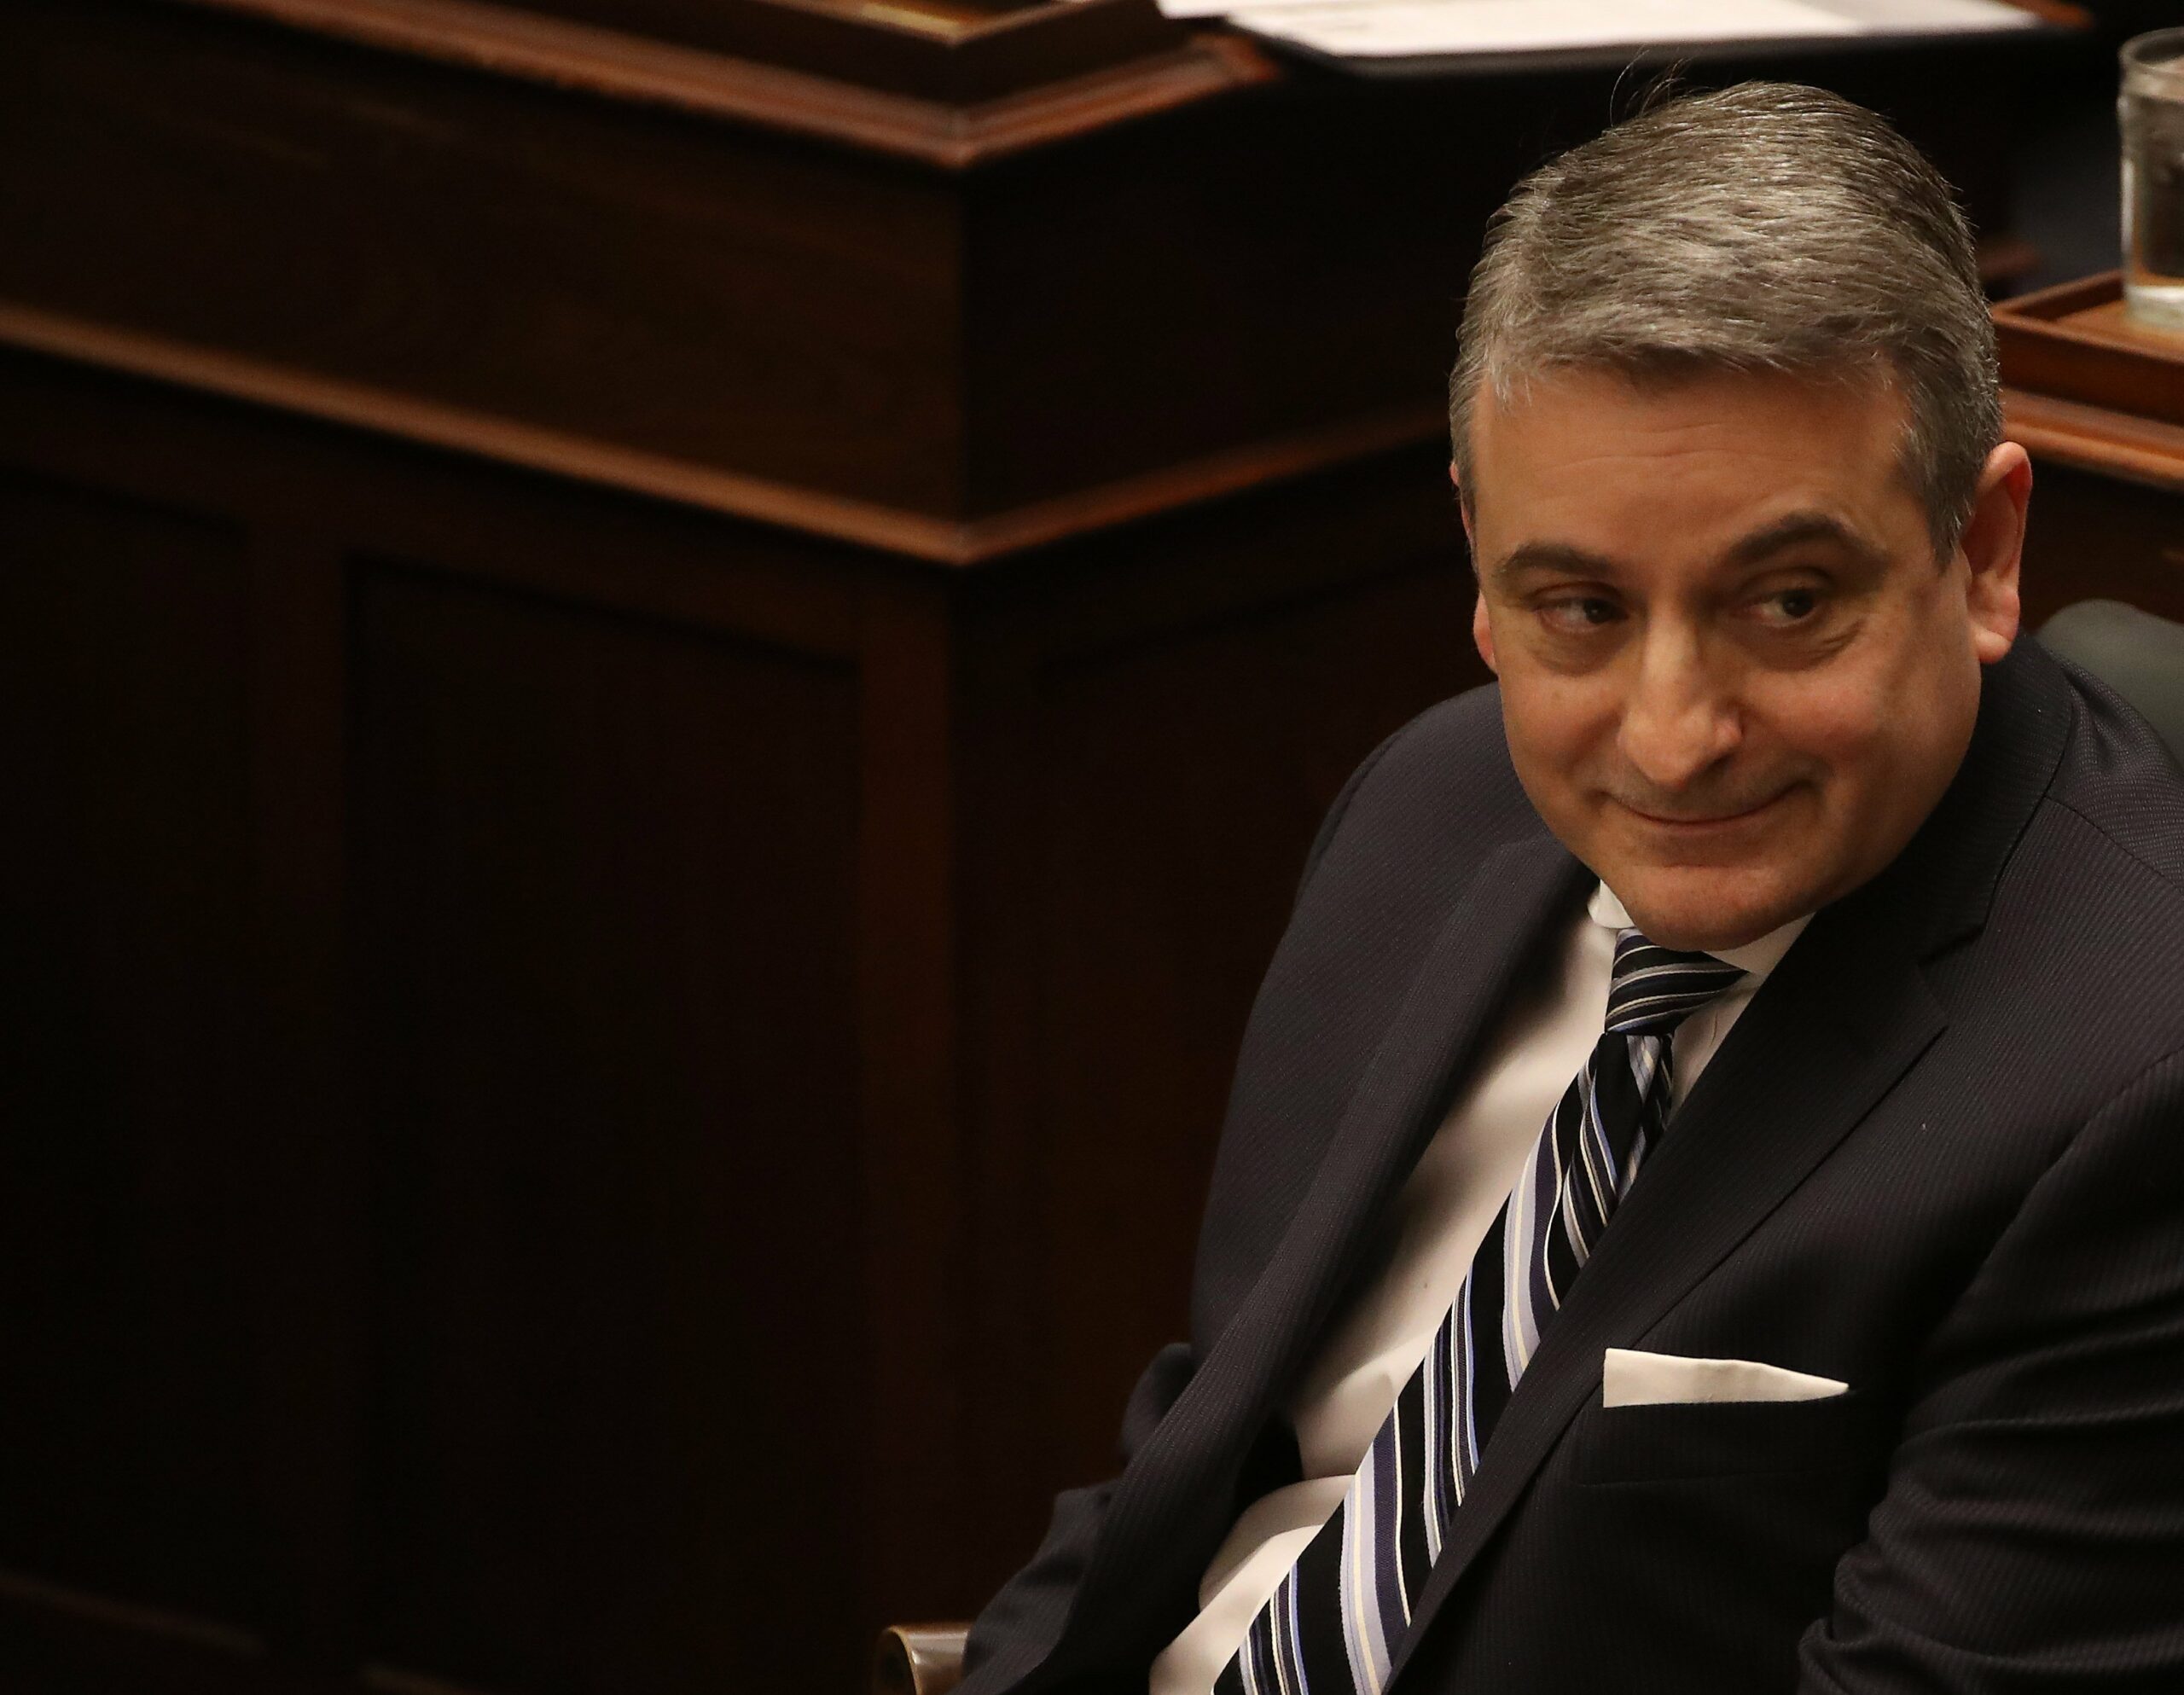 'Authority of the state will ultimately prevail': Calandra